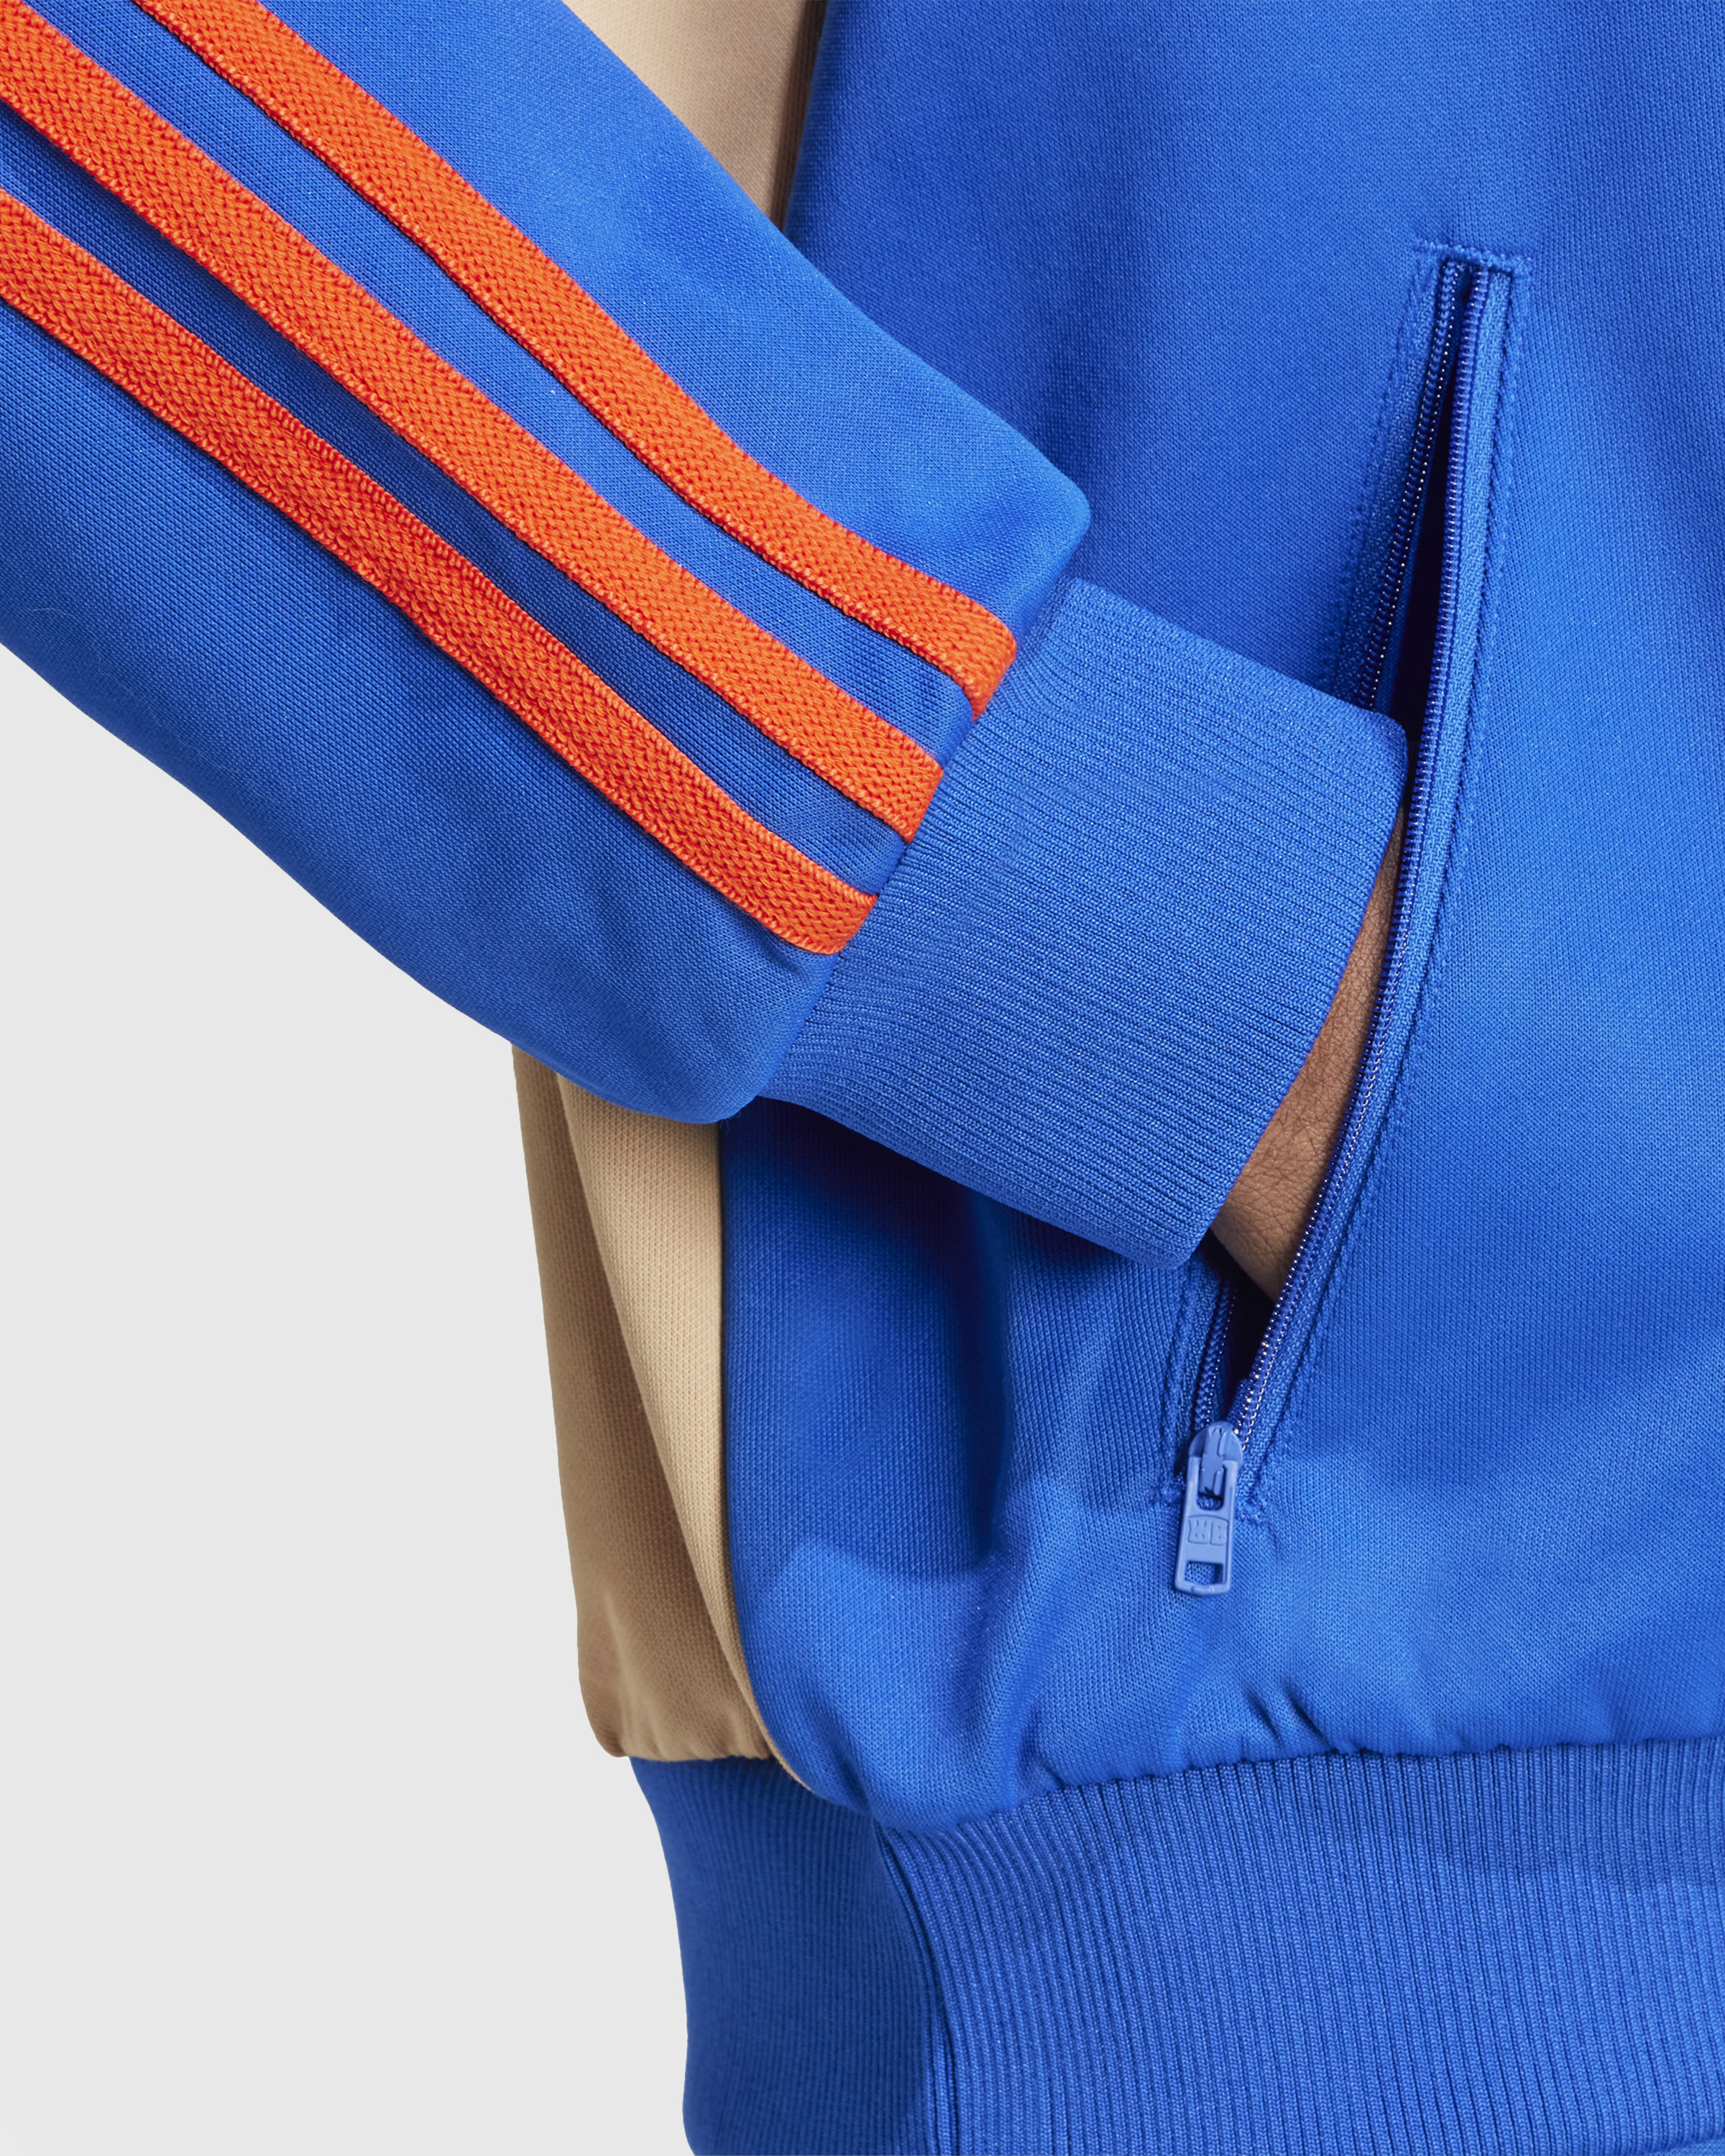 Adidas x Wales Bonner – Jersey Track Top Royal Blue - Track Jackets - Blue - Image 5